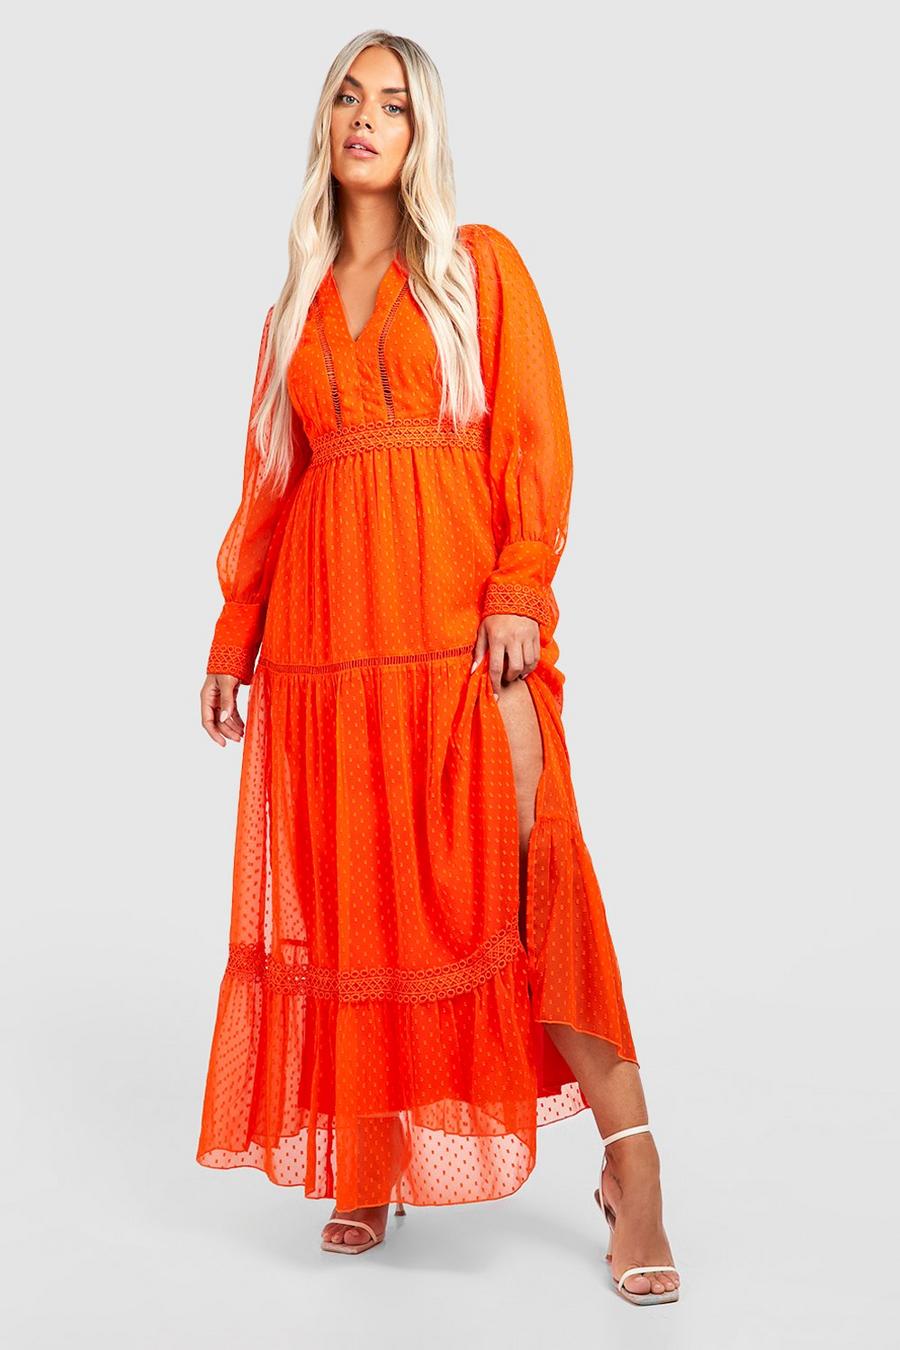 Orange Hen Party Outfits